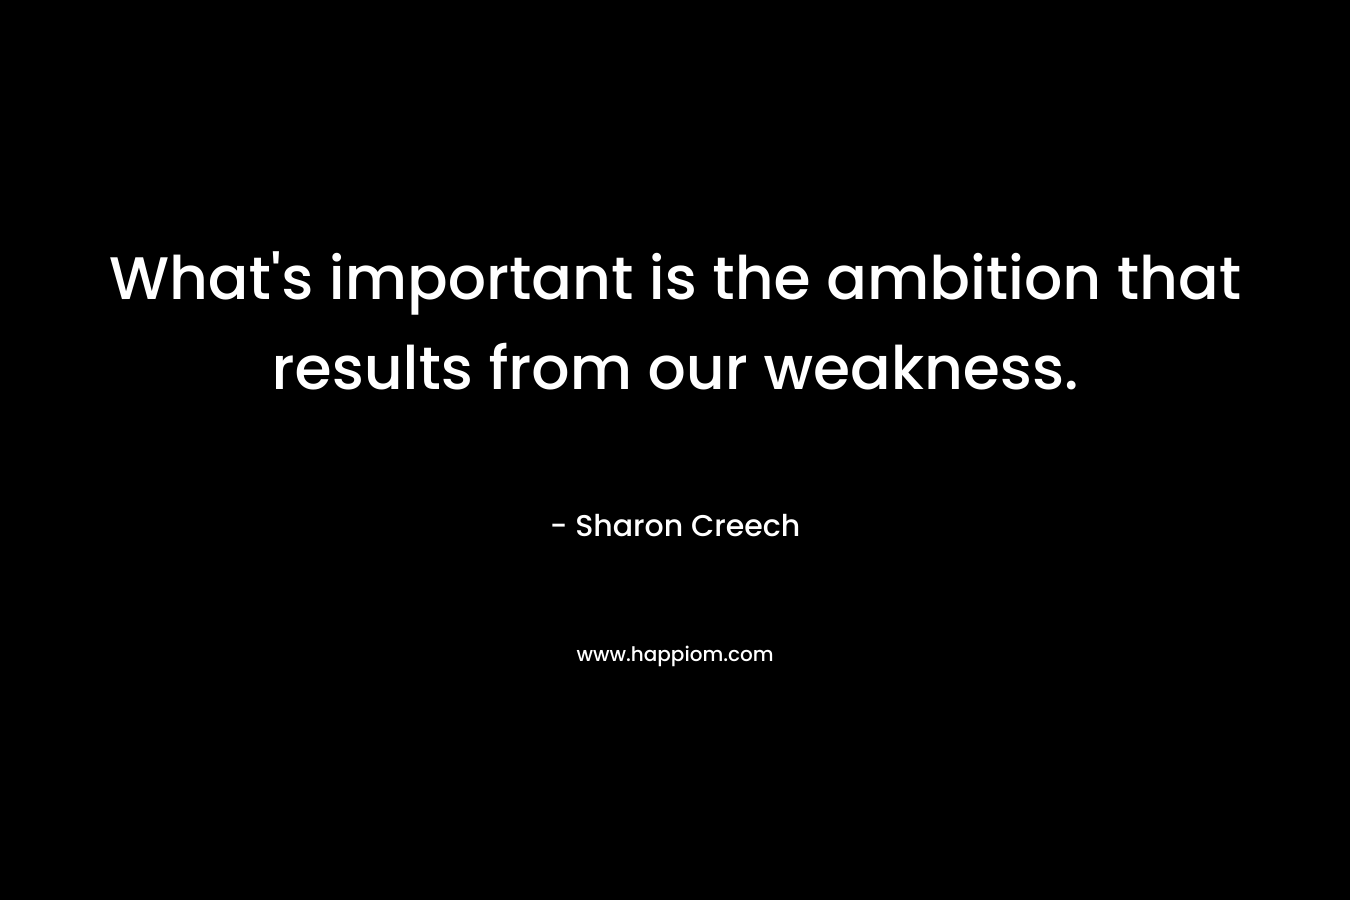 What's important is the ambition that results from our weakness.